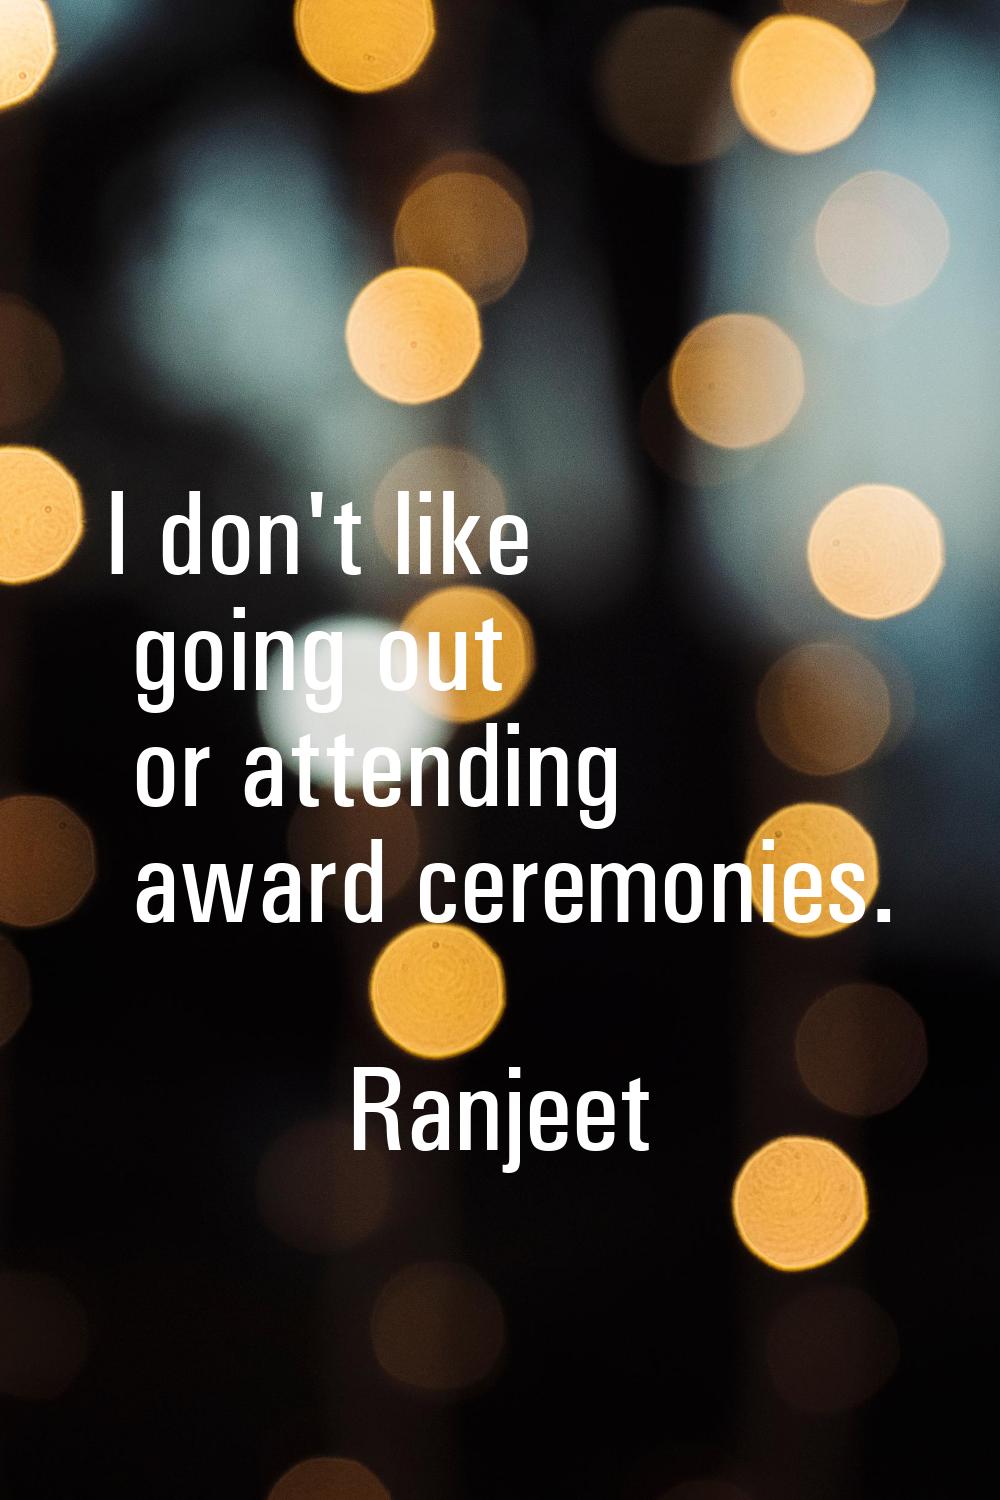 I don't like going out or attending award ceremonies.